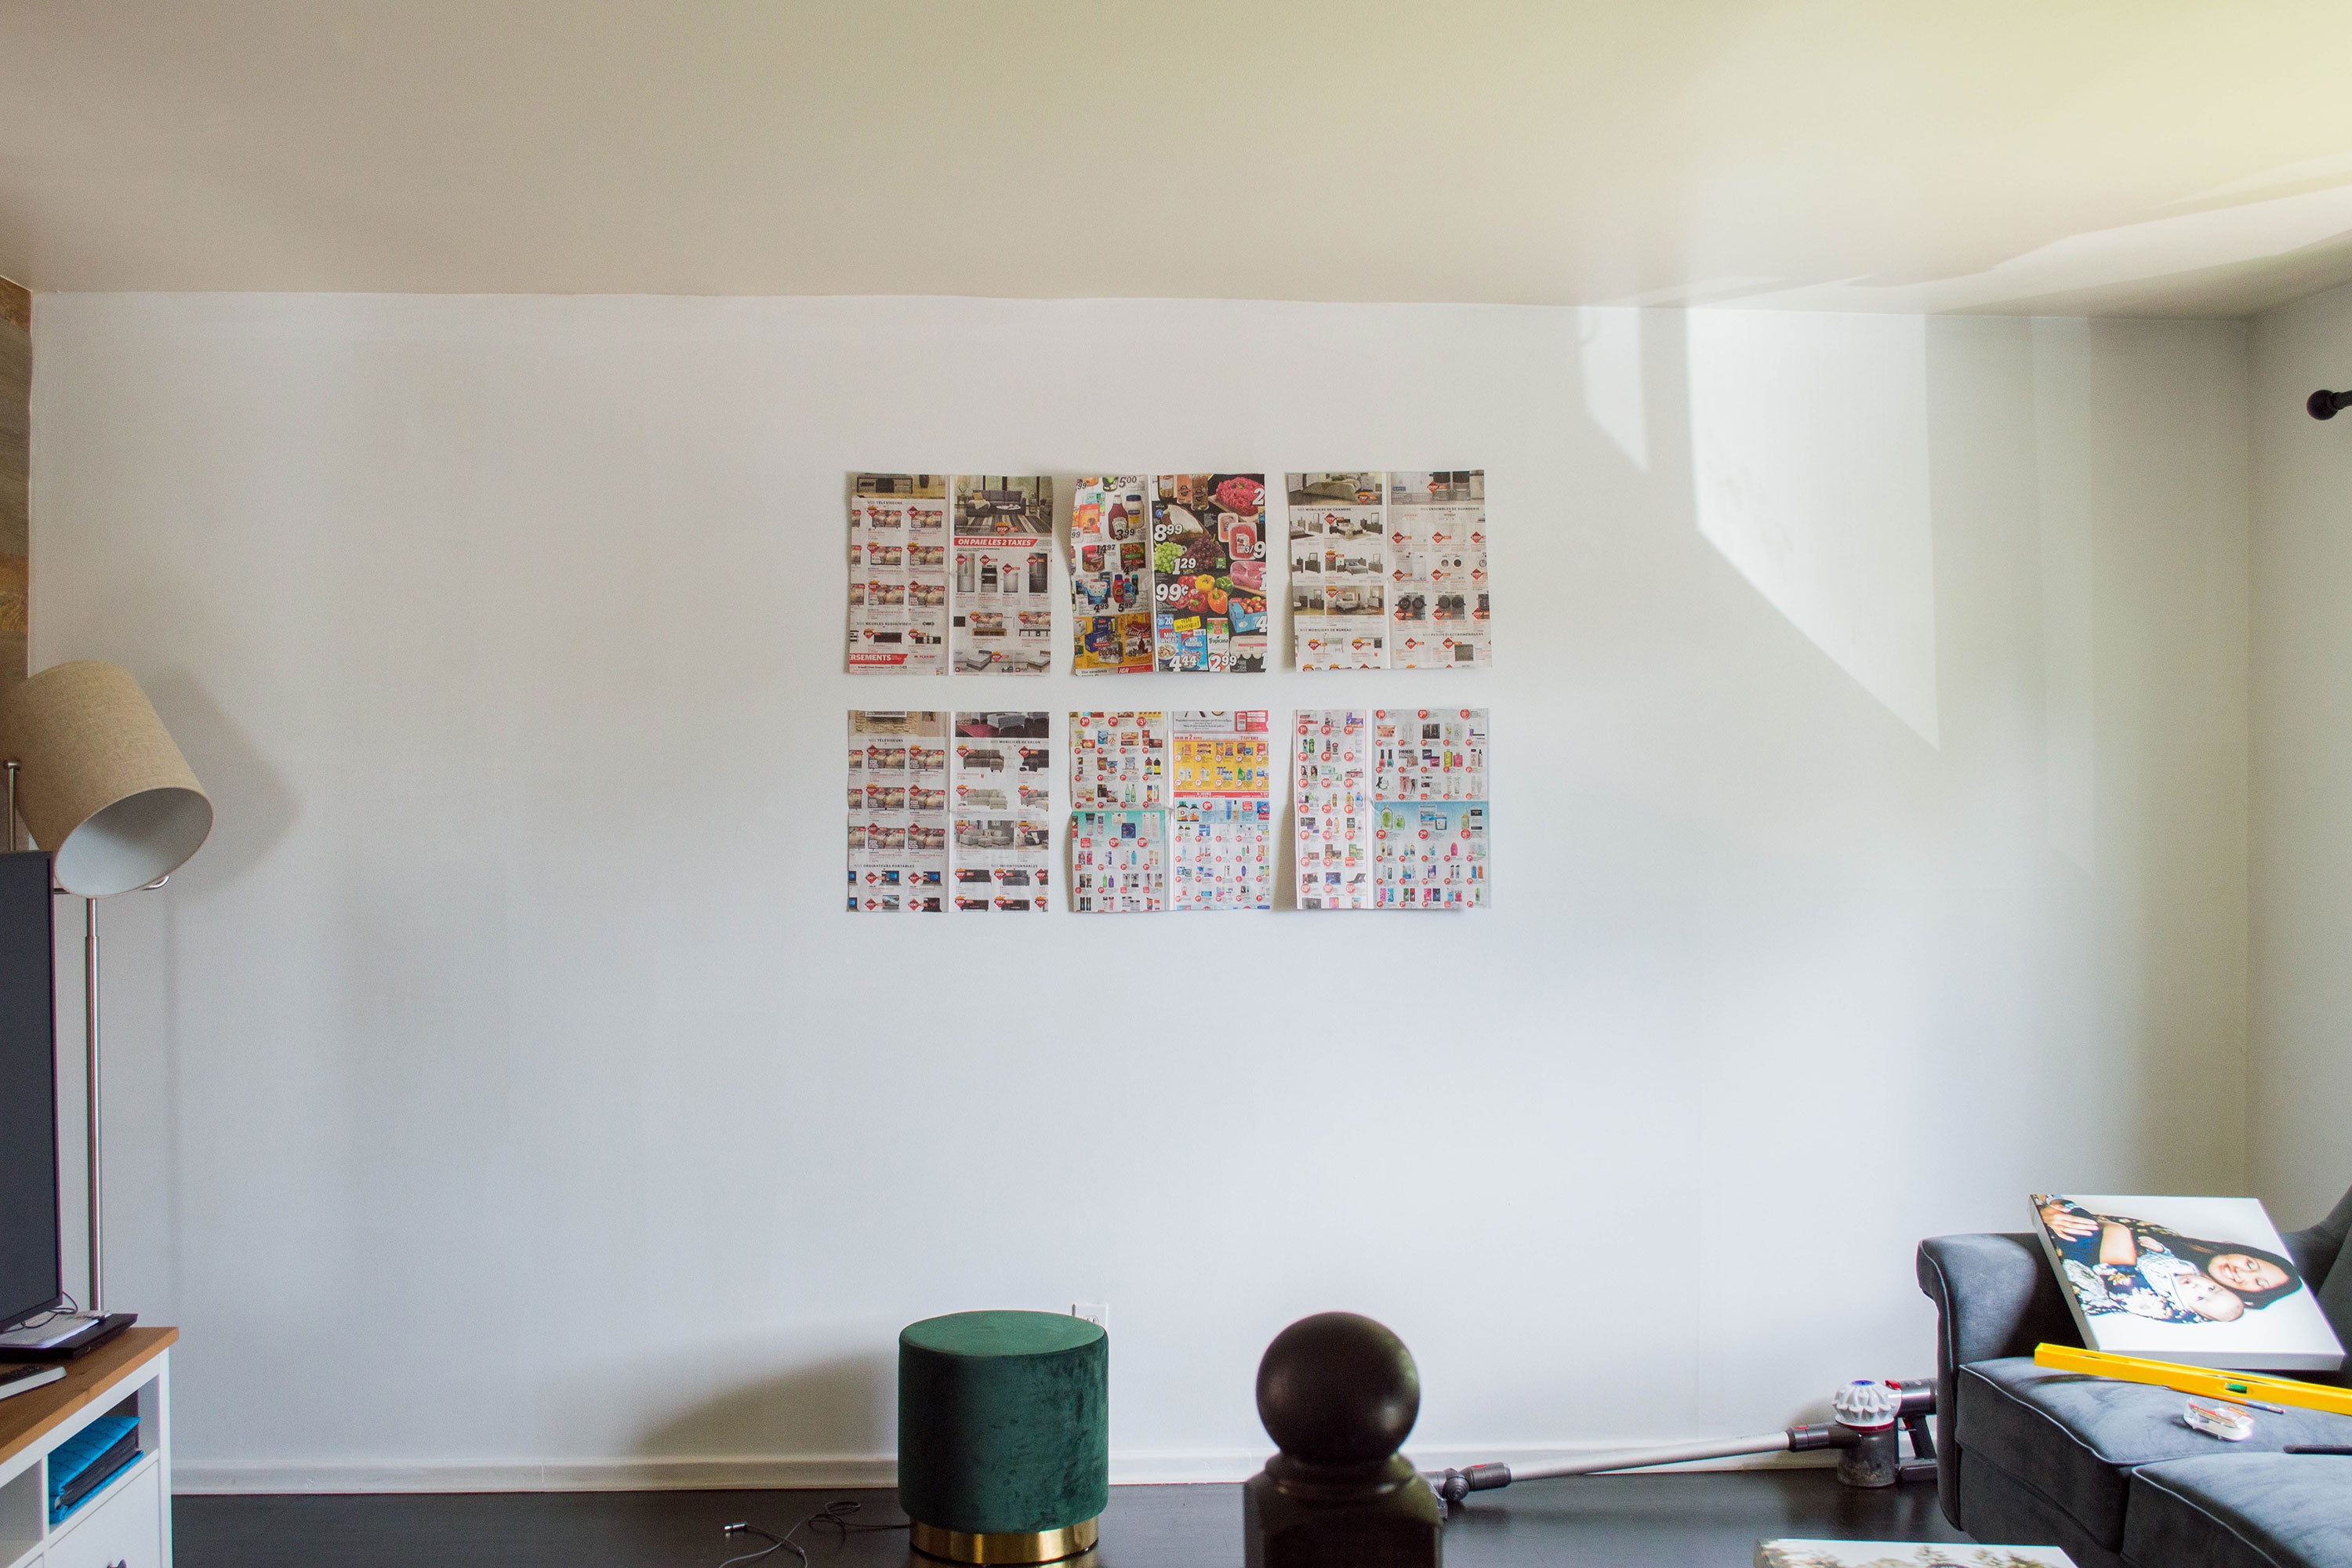 Photo of Newspapers on Wall, Creating a Gallery Wall of Family Photos